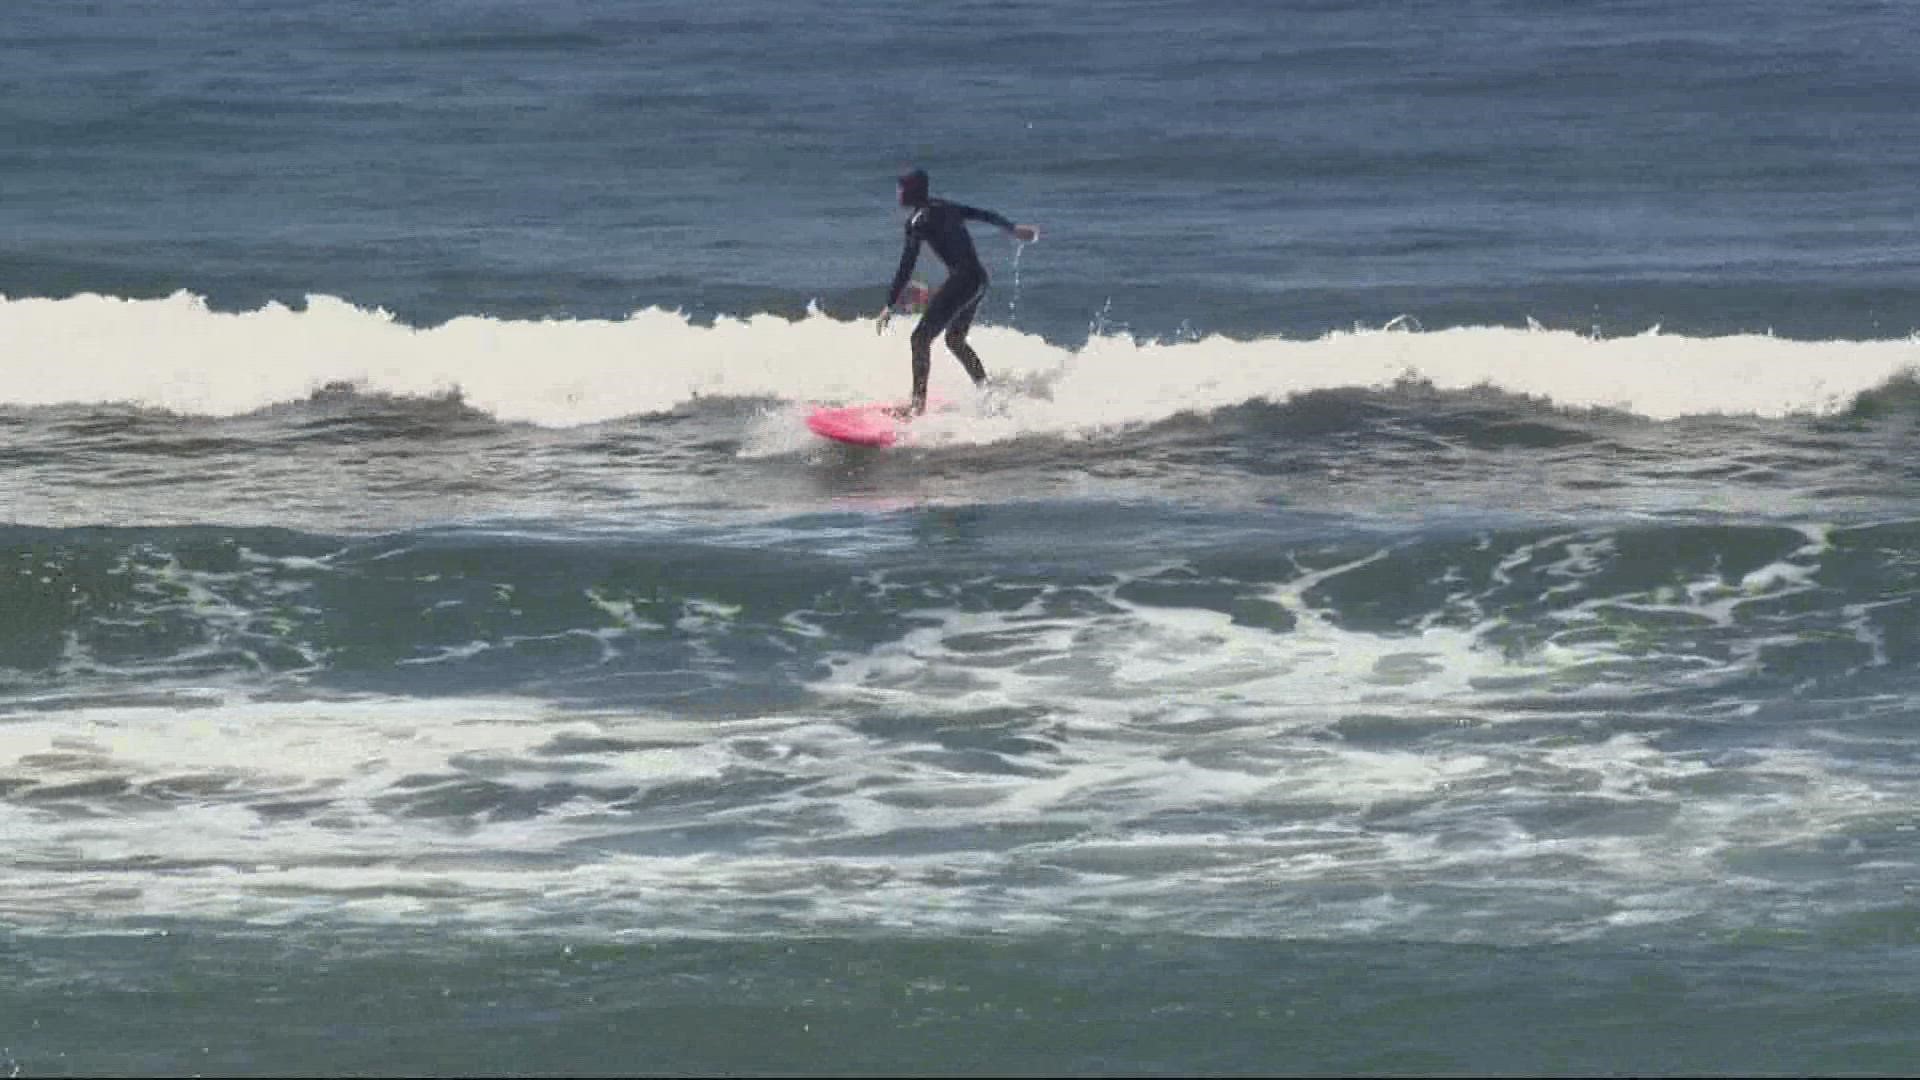 With temperatures in the 90s and 100s in the city, many are heading west to the Oregon Coast where temperatures are cooler. KGW's Joe Raineri checked out the crowds.